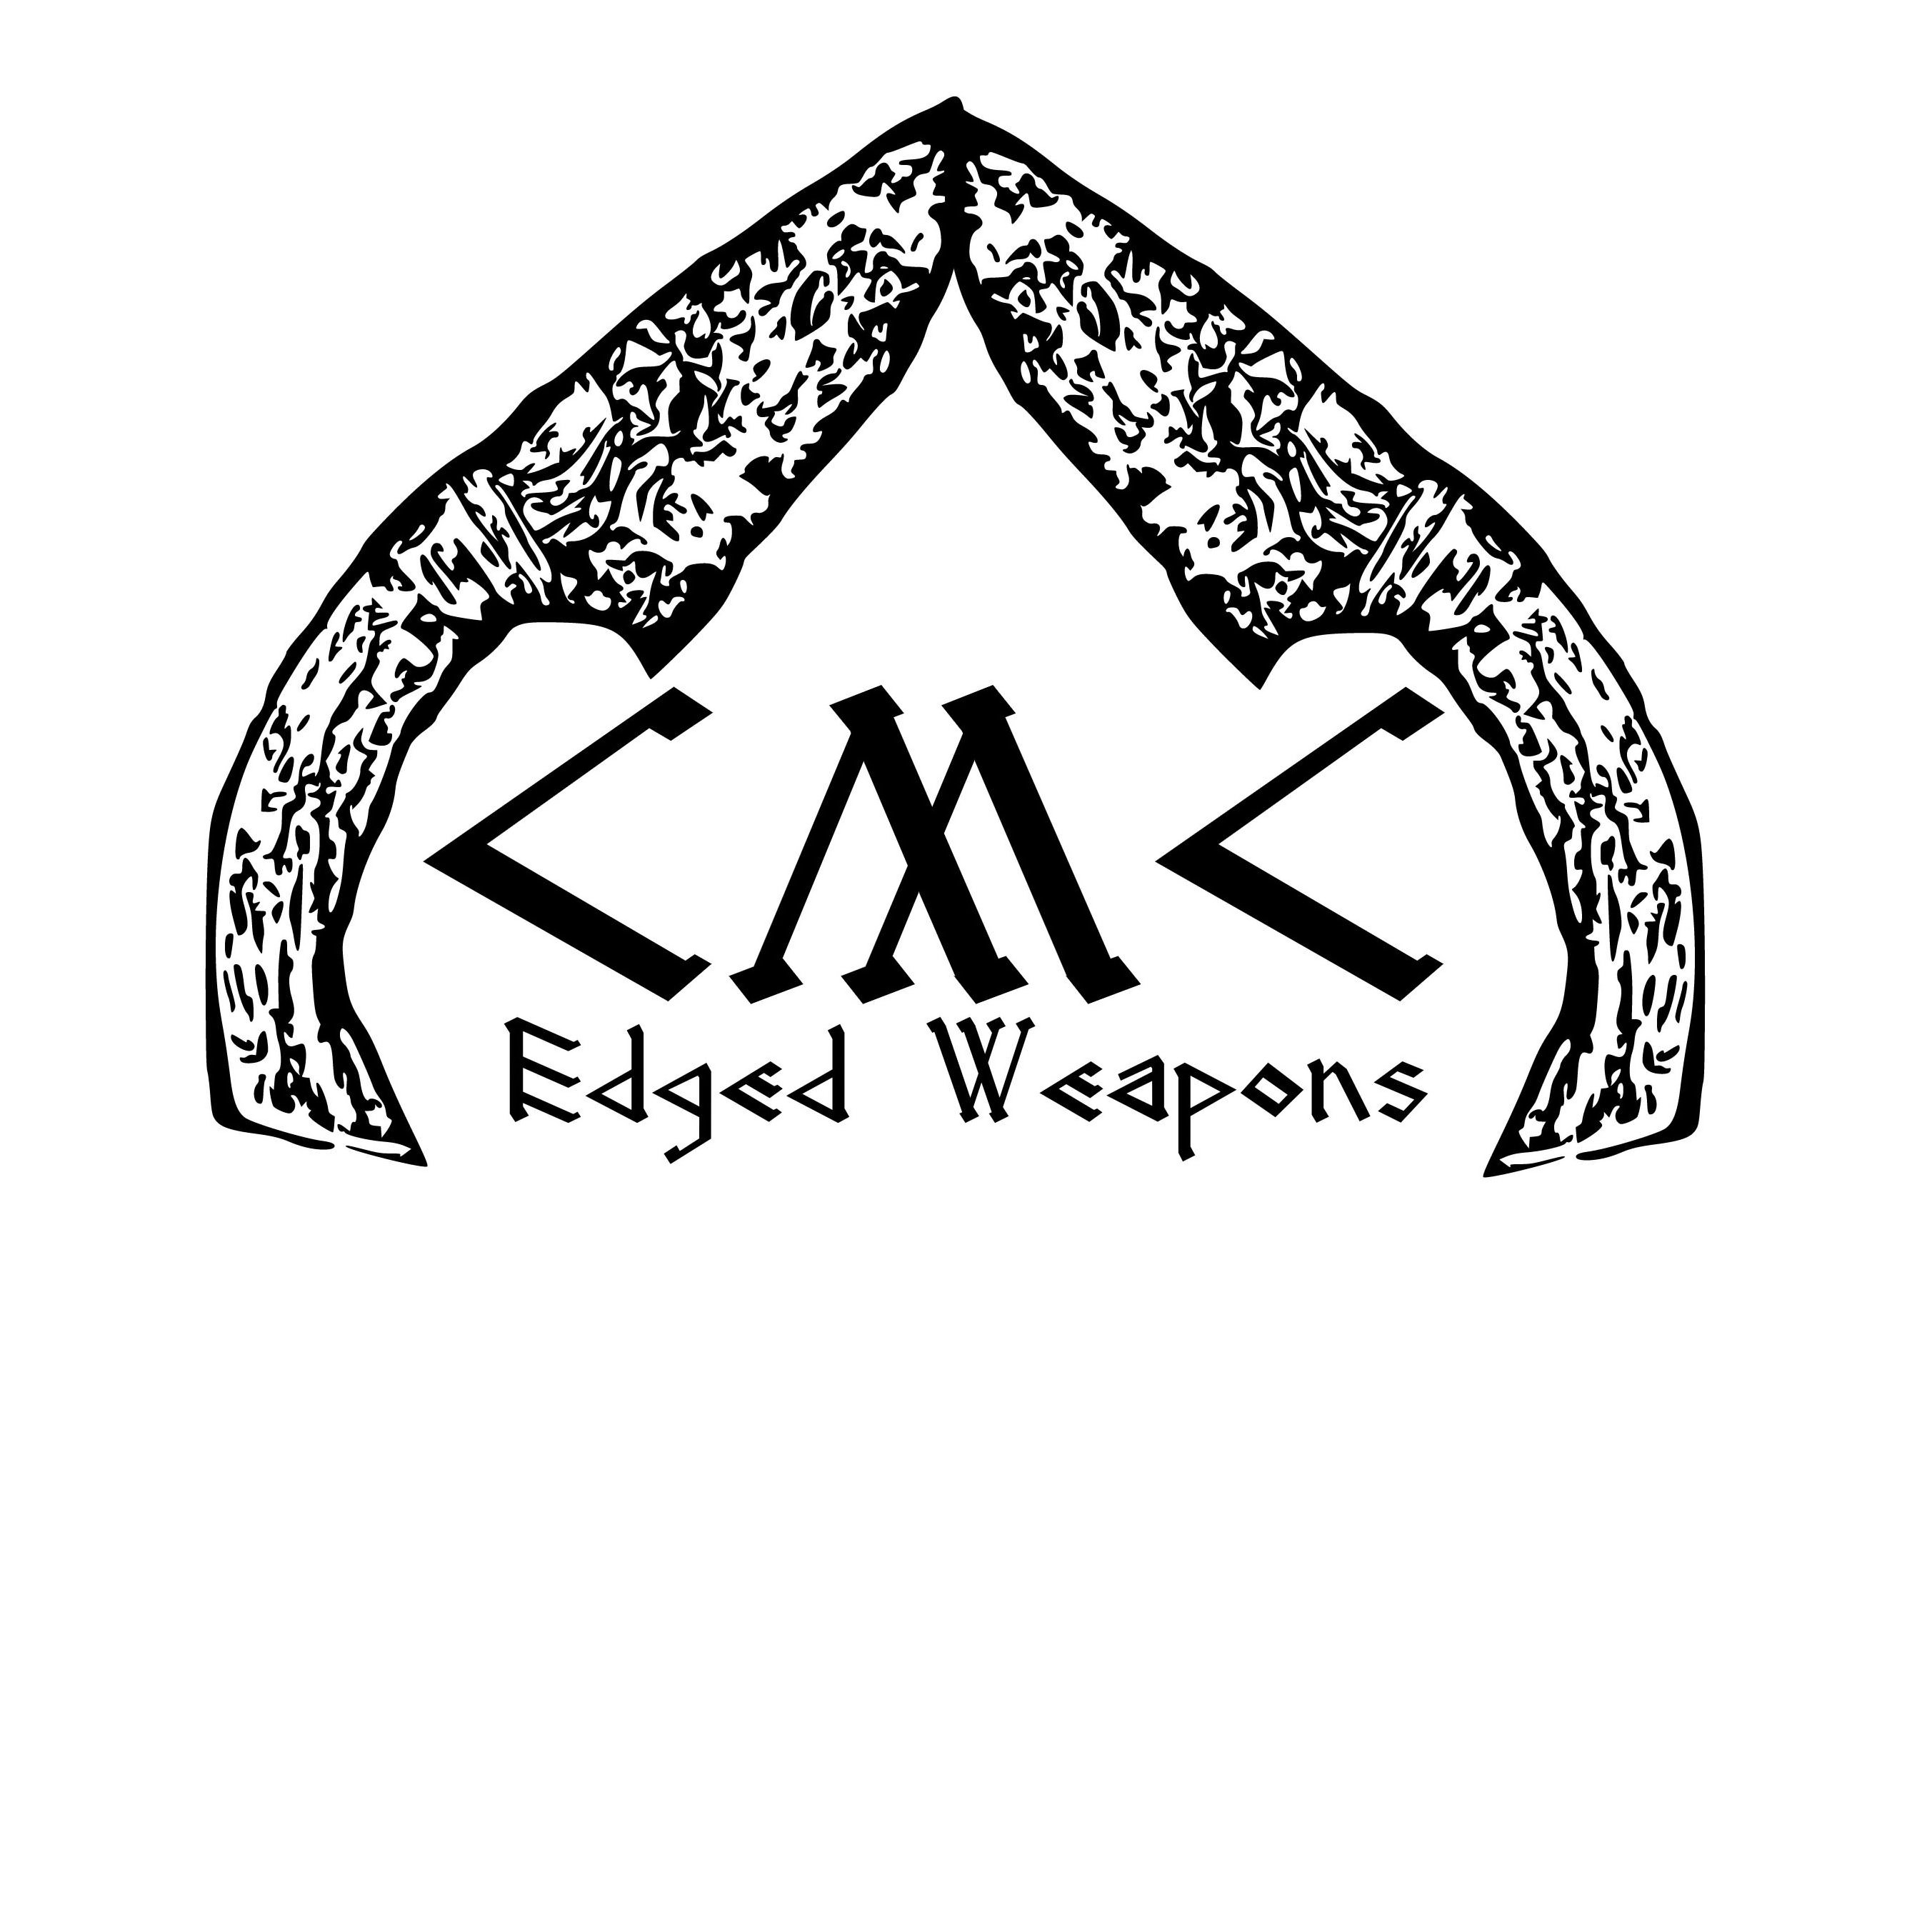  CMC EDGED WEAPONS